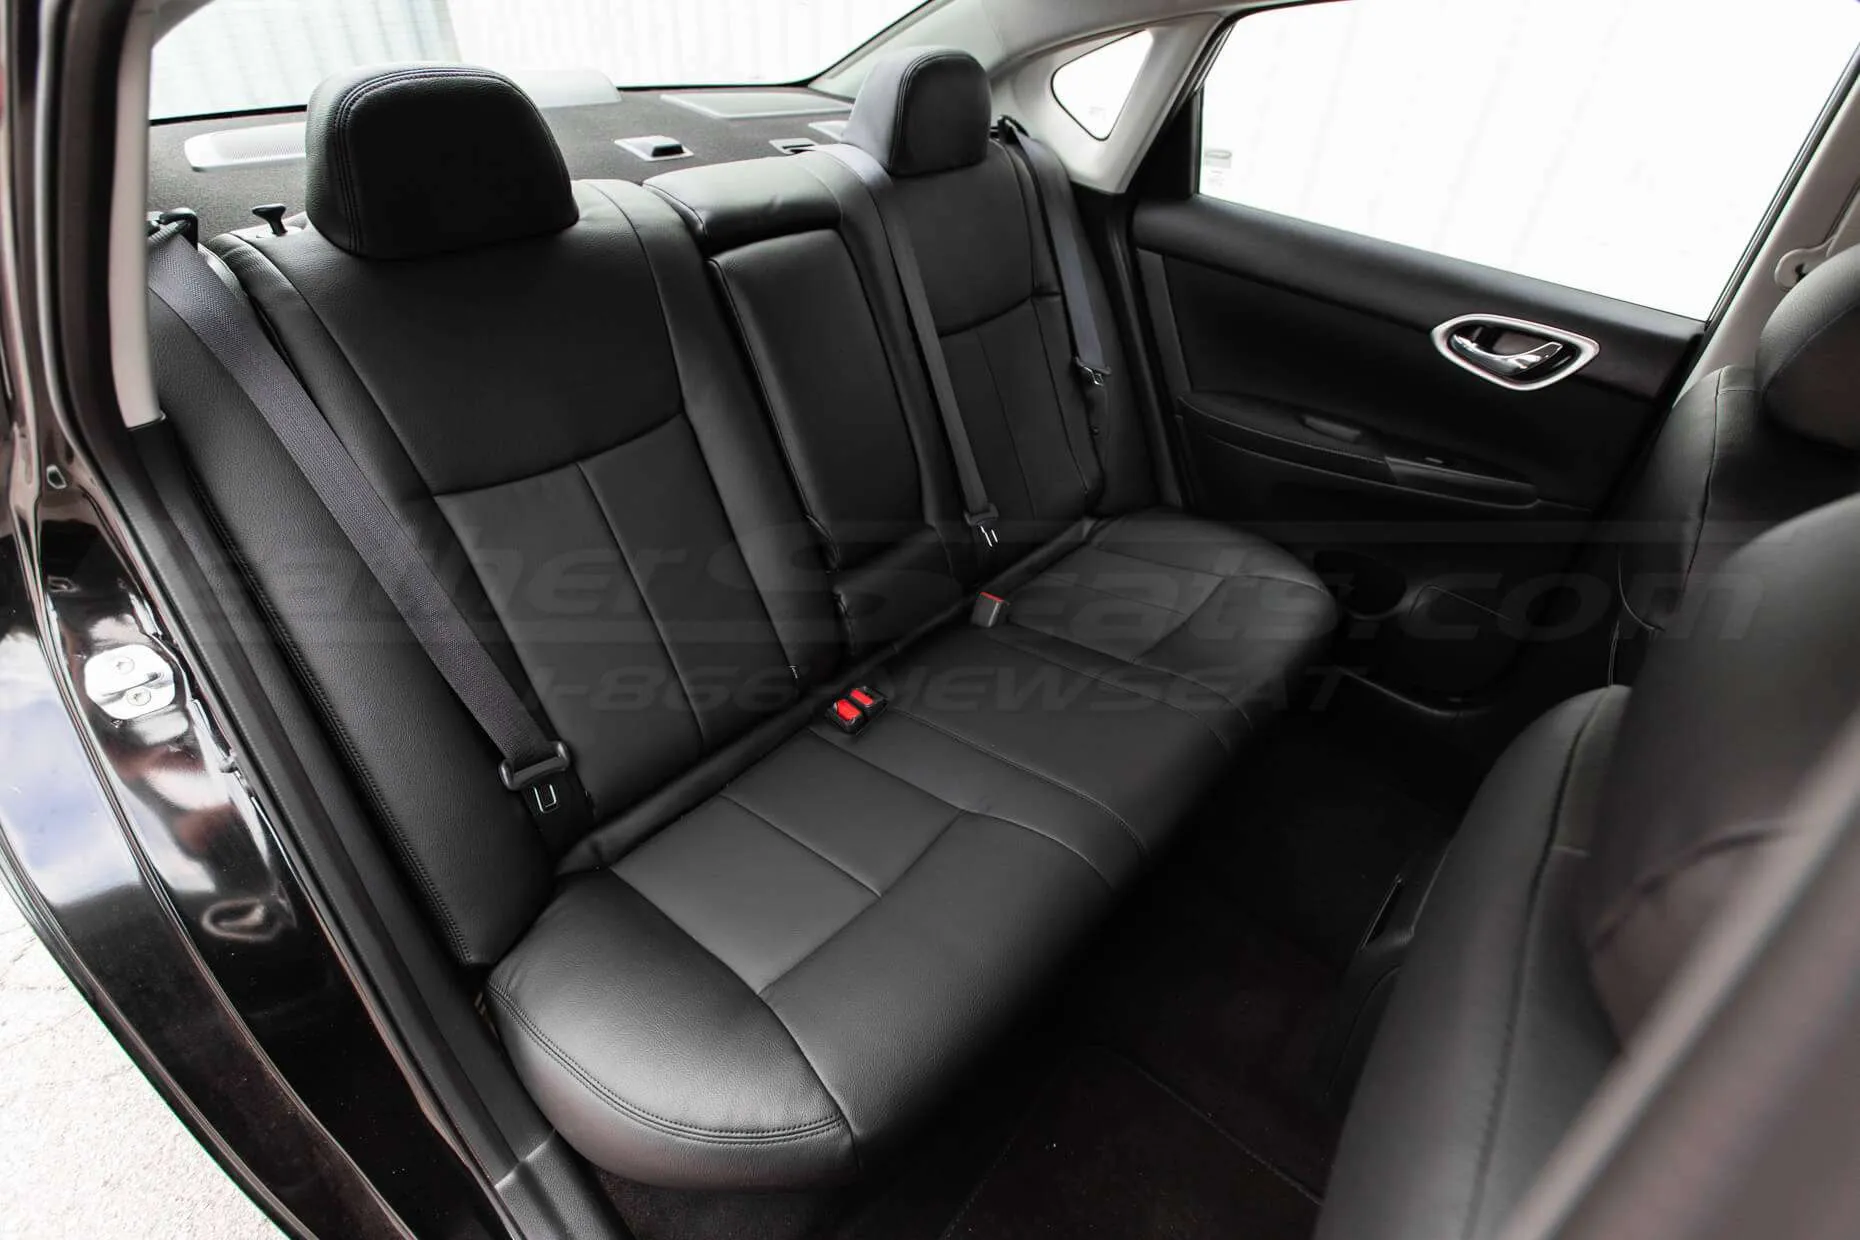 Nissan Sentra Leather Seats - Black - Installed - Rear